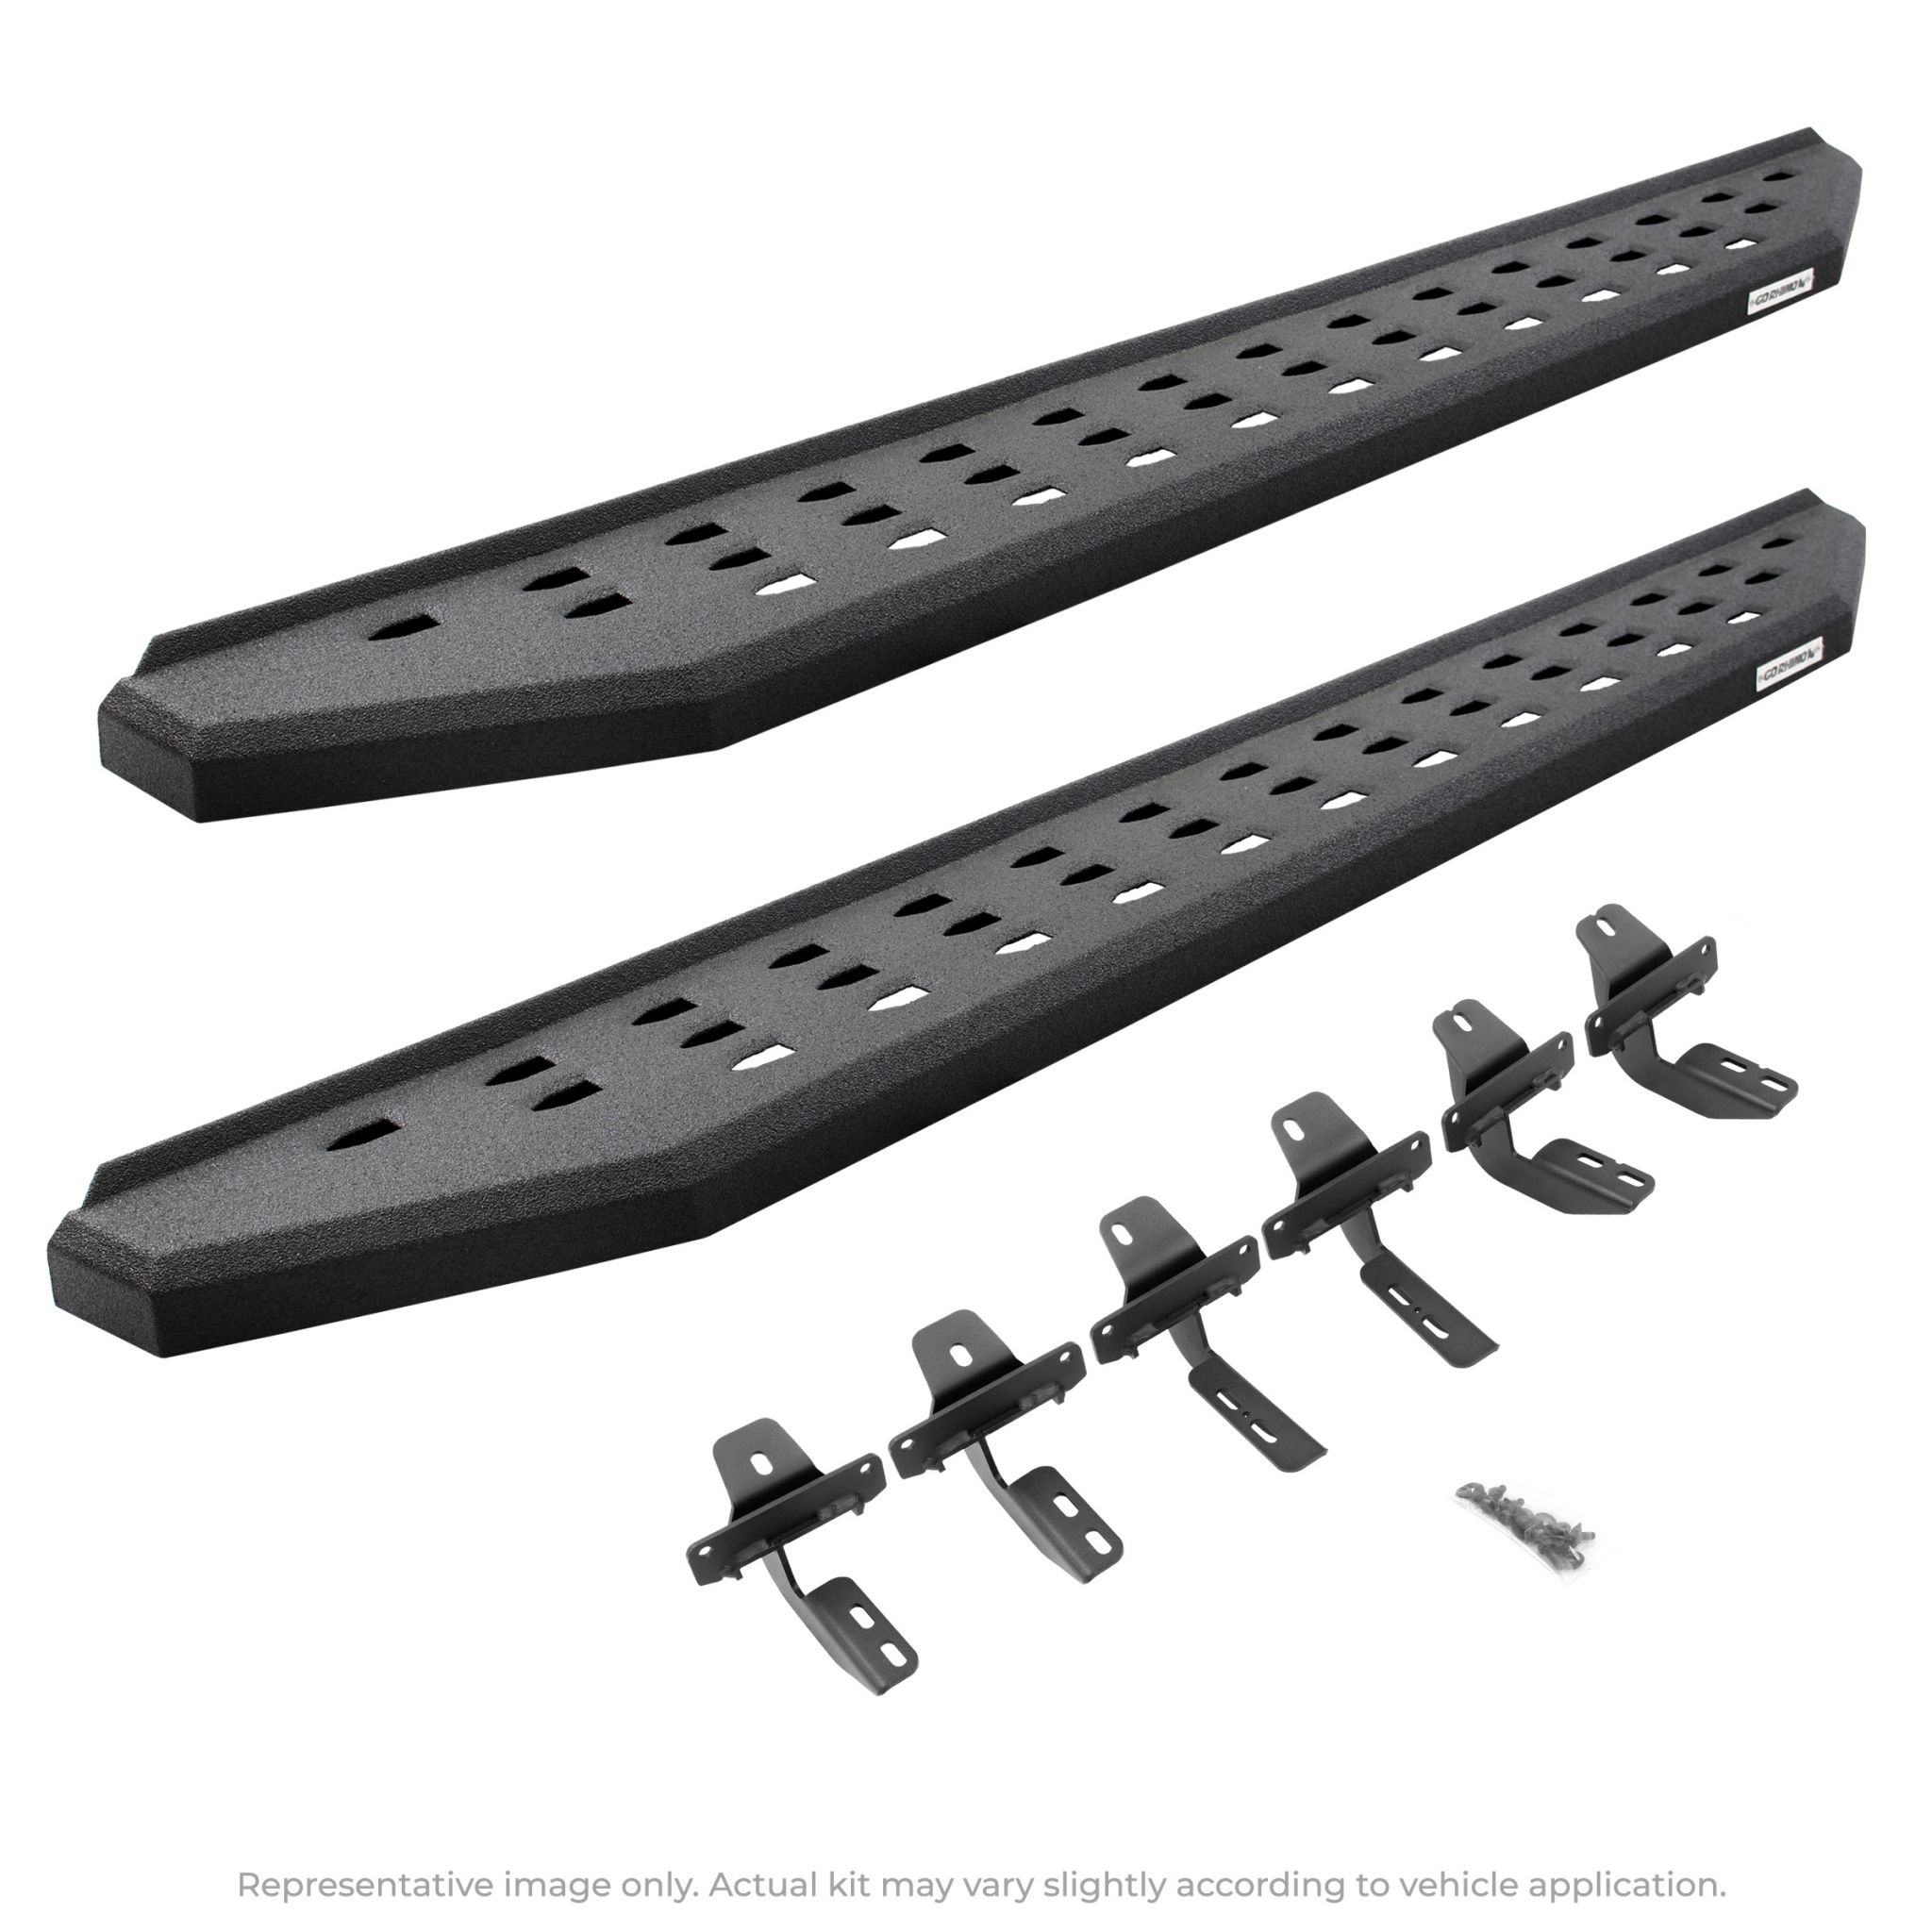 Go Rhino - 69450673T - RB20 Running Boards With Mounting Brackets - Protective Bedliner Coating